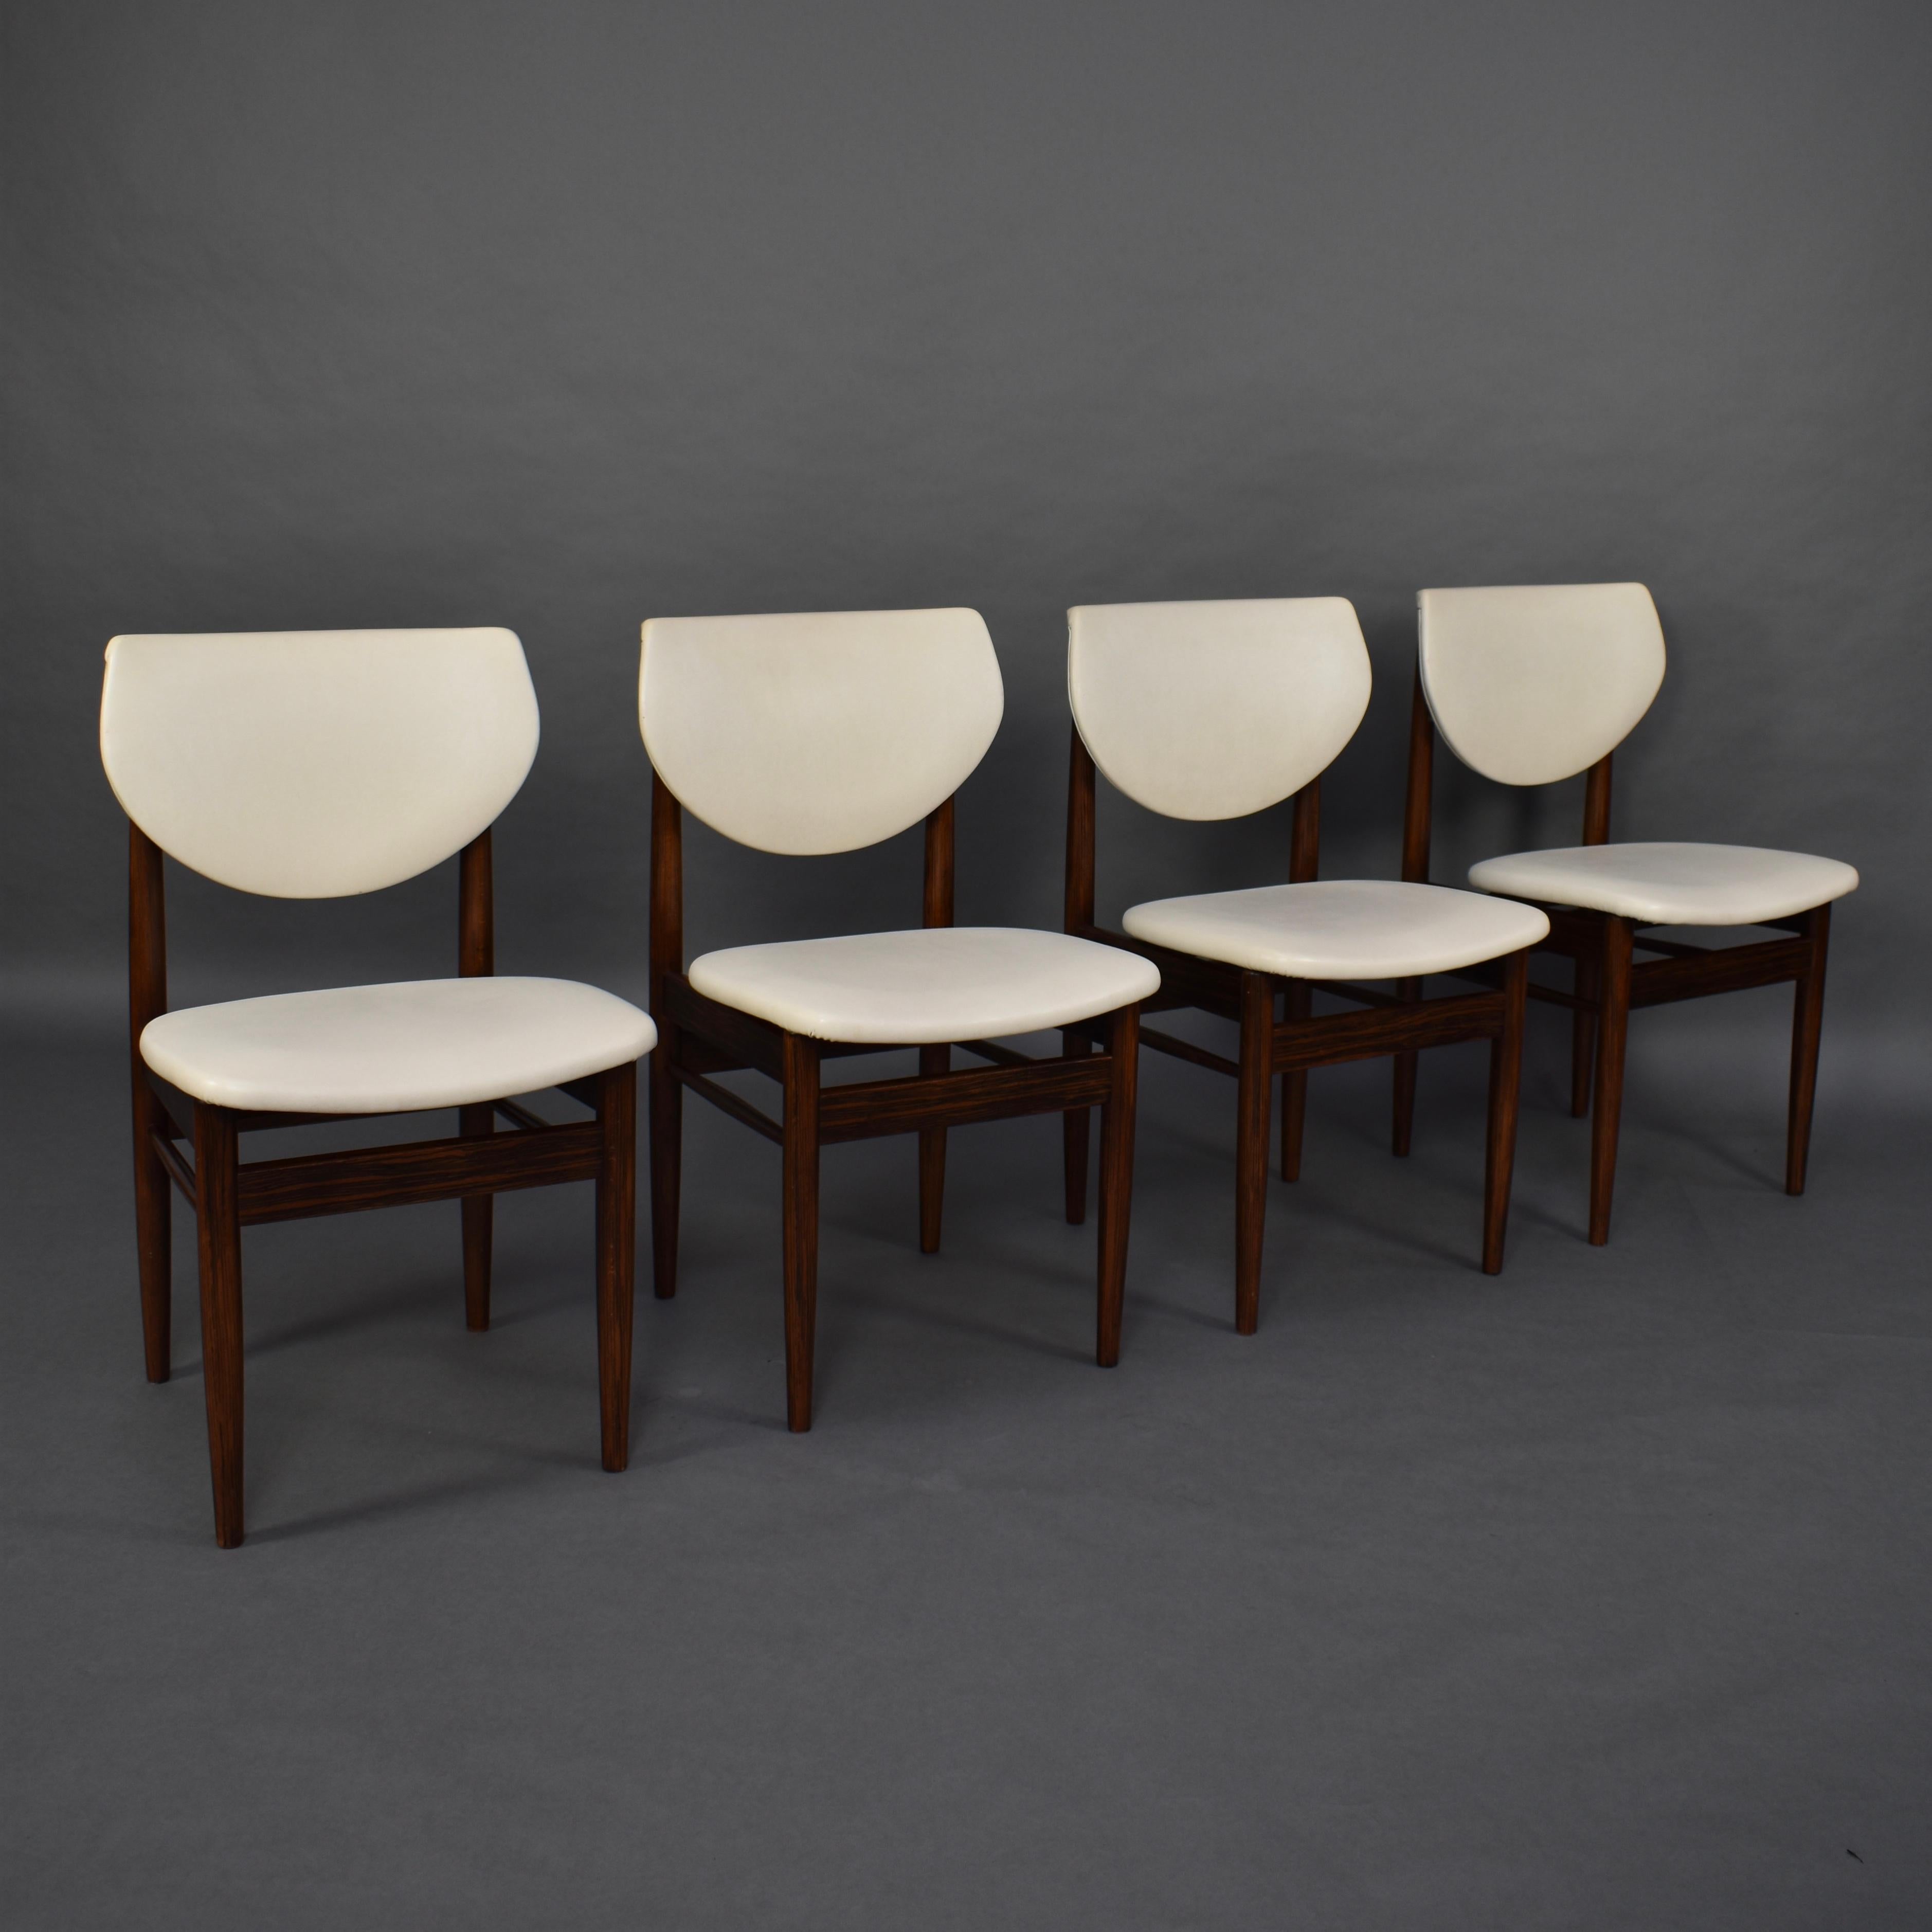 Set of 4 dining chairs in solid Wenge and creme faux leather. It is unusual to find chairs made of Wenge. It has beautiful black drawings in the wood.

Design: Unknown

Manufacturer: Unknown

Date of manufacture: circa 1950-1960

Model: